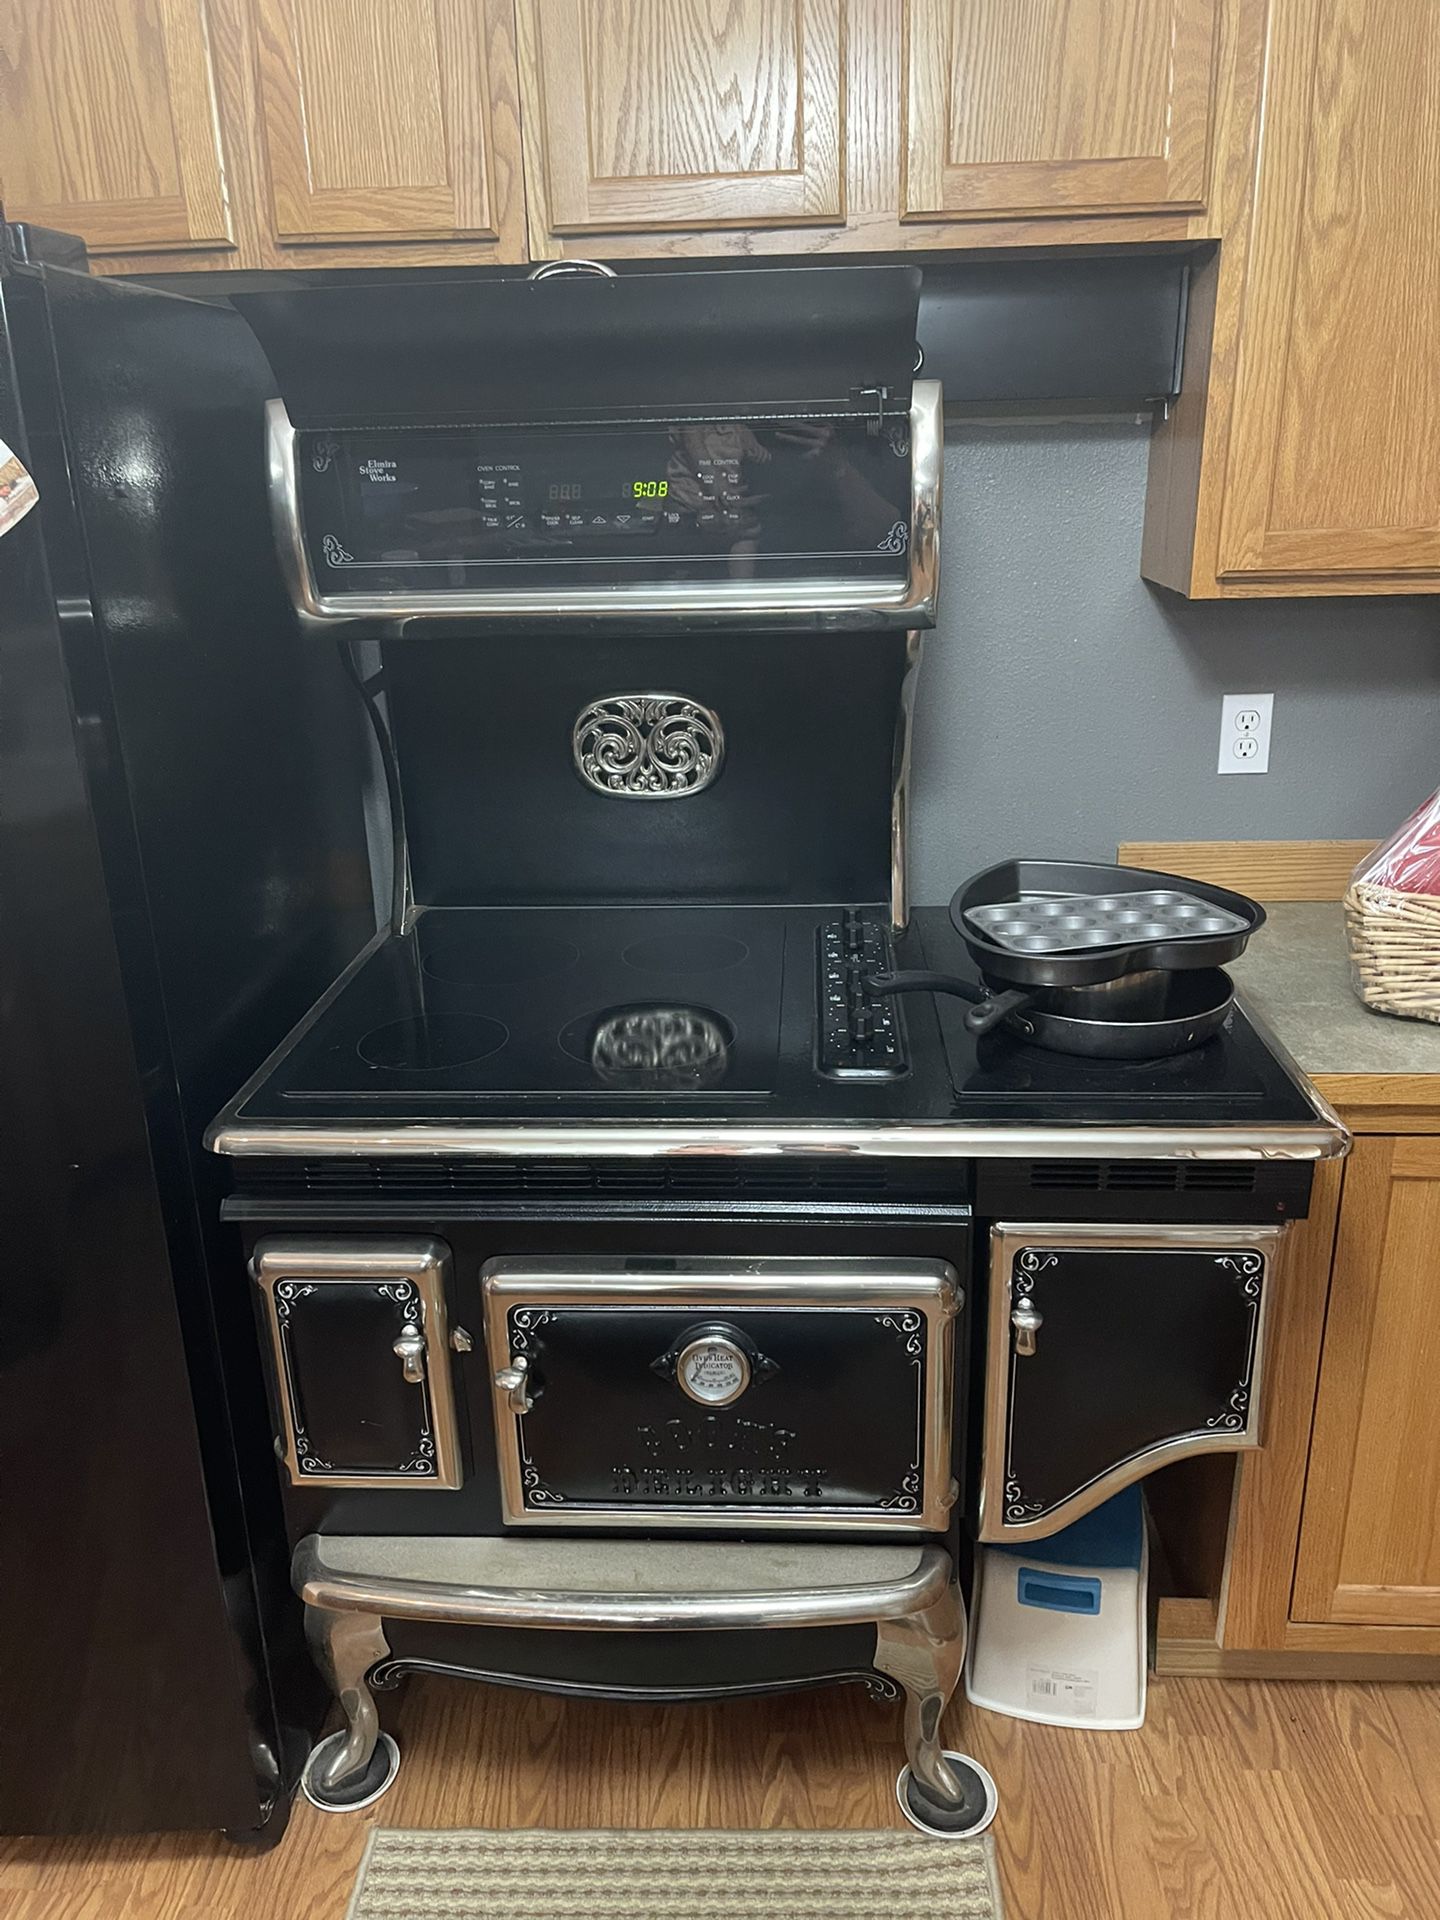 Elmira Cooks Delight Model 1855 Electric Stove Black With Chrome Accents